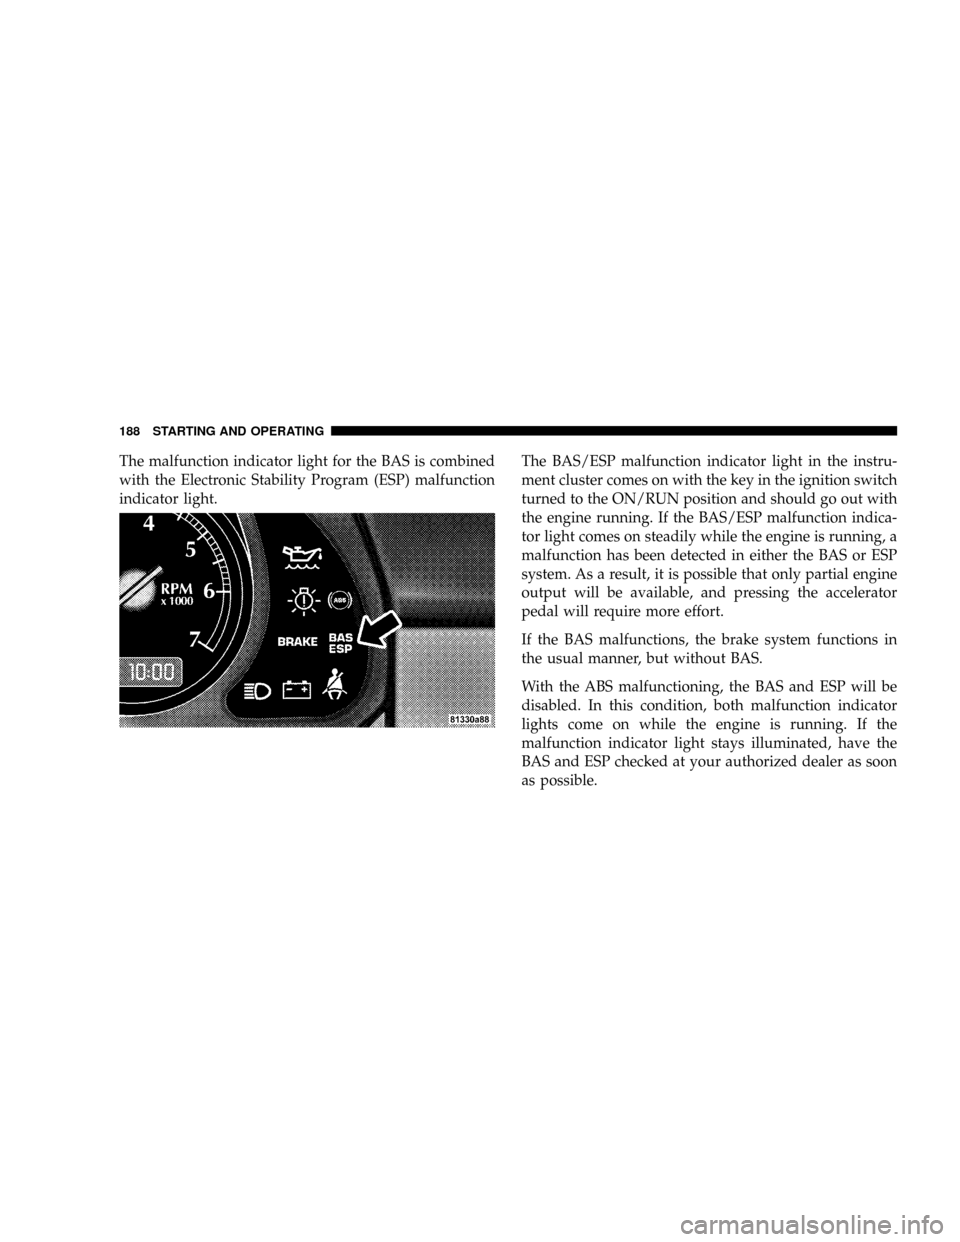 CHRYSLER CROSSFIRE 2008 1.G Service Manual The malfunction indicator light for the BAS is combined
with the Electronic Stability Program (ESP) malfunction
indicator light.The BAS/ESP malfunction indicator light in the instru-
ment cluster come